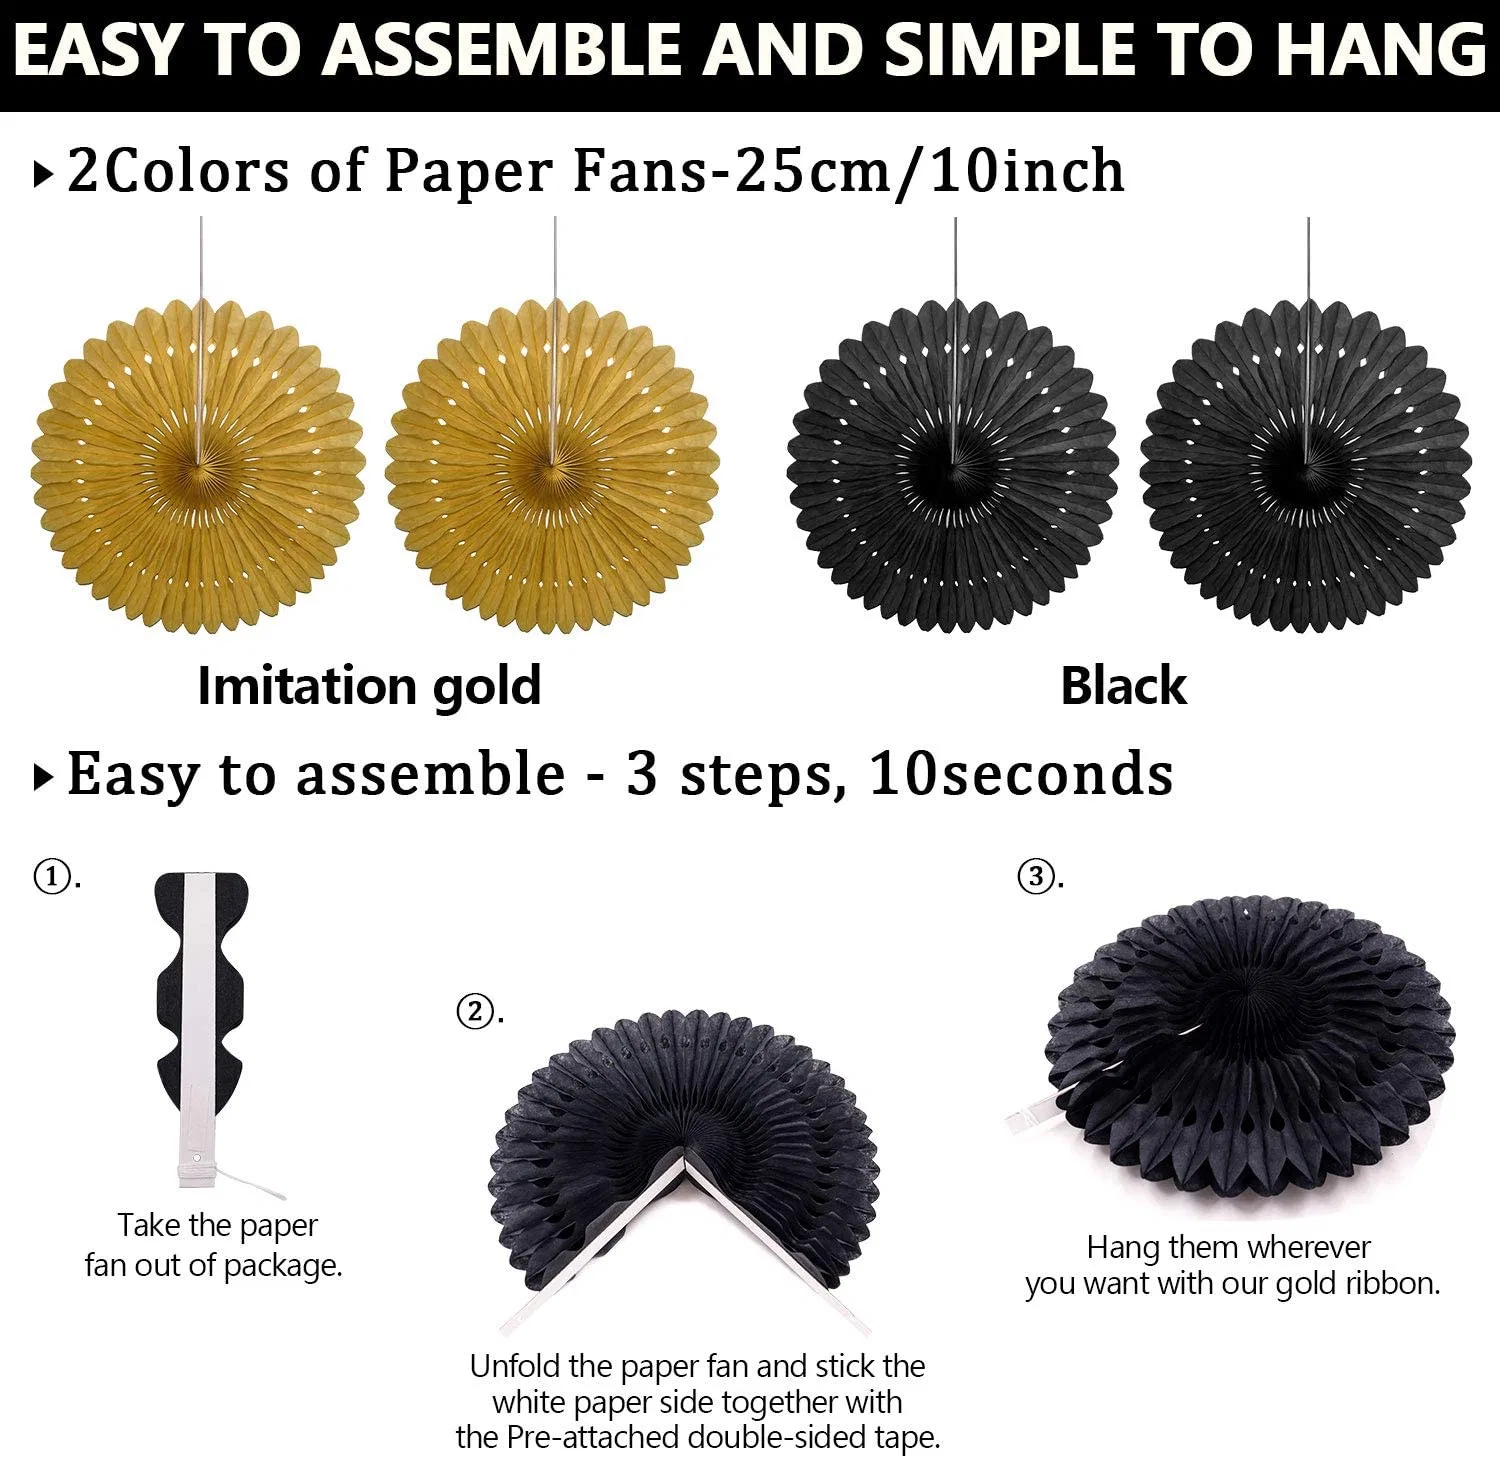 Black and Golden Theme Hanging Paper Fans, POM Poms Flowers, Garlands String Polka DOT and Bunting Flags for Christmas Party